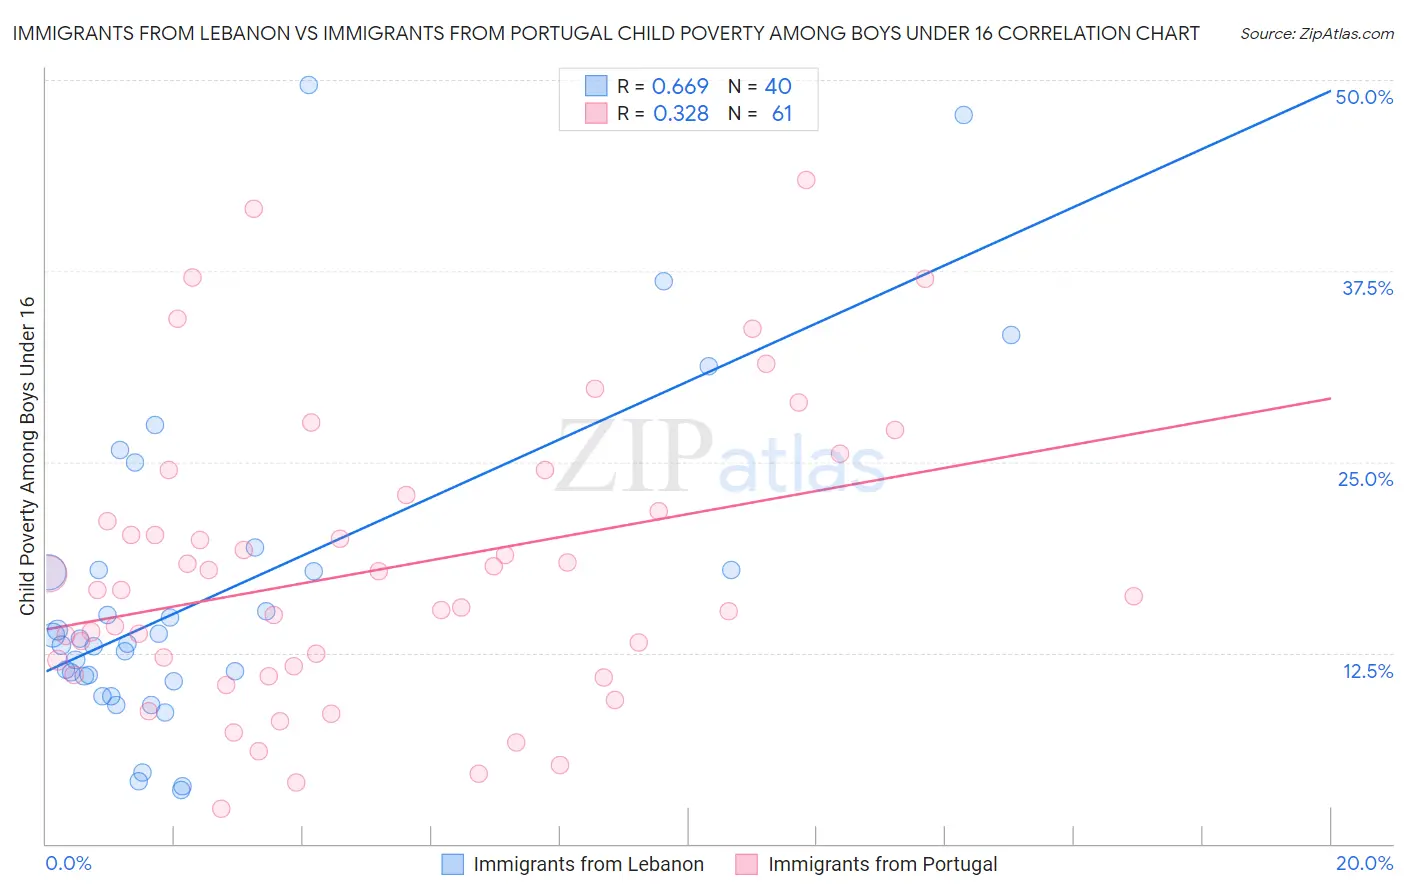 Immigrants from Lebanon vs Immigrants from Portugal Child Poverty Among Boys Under 16